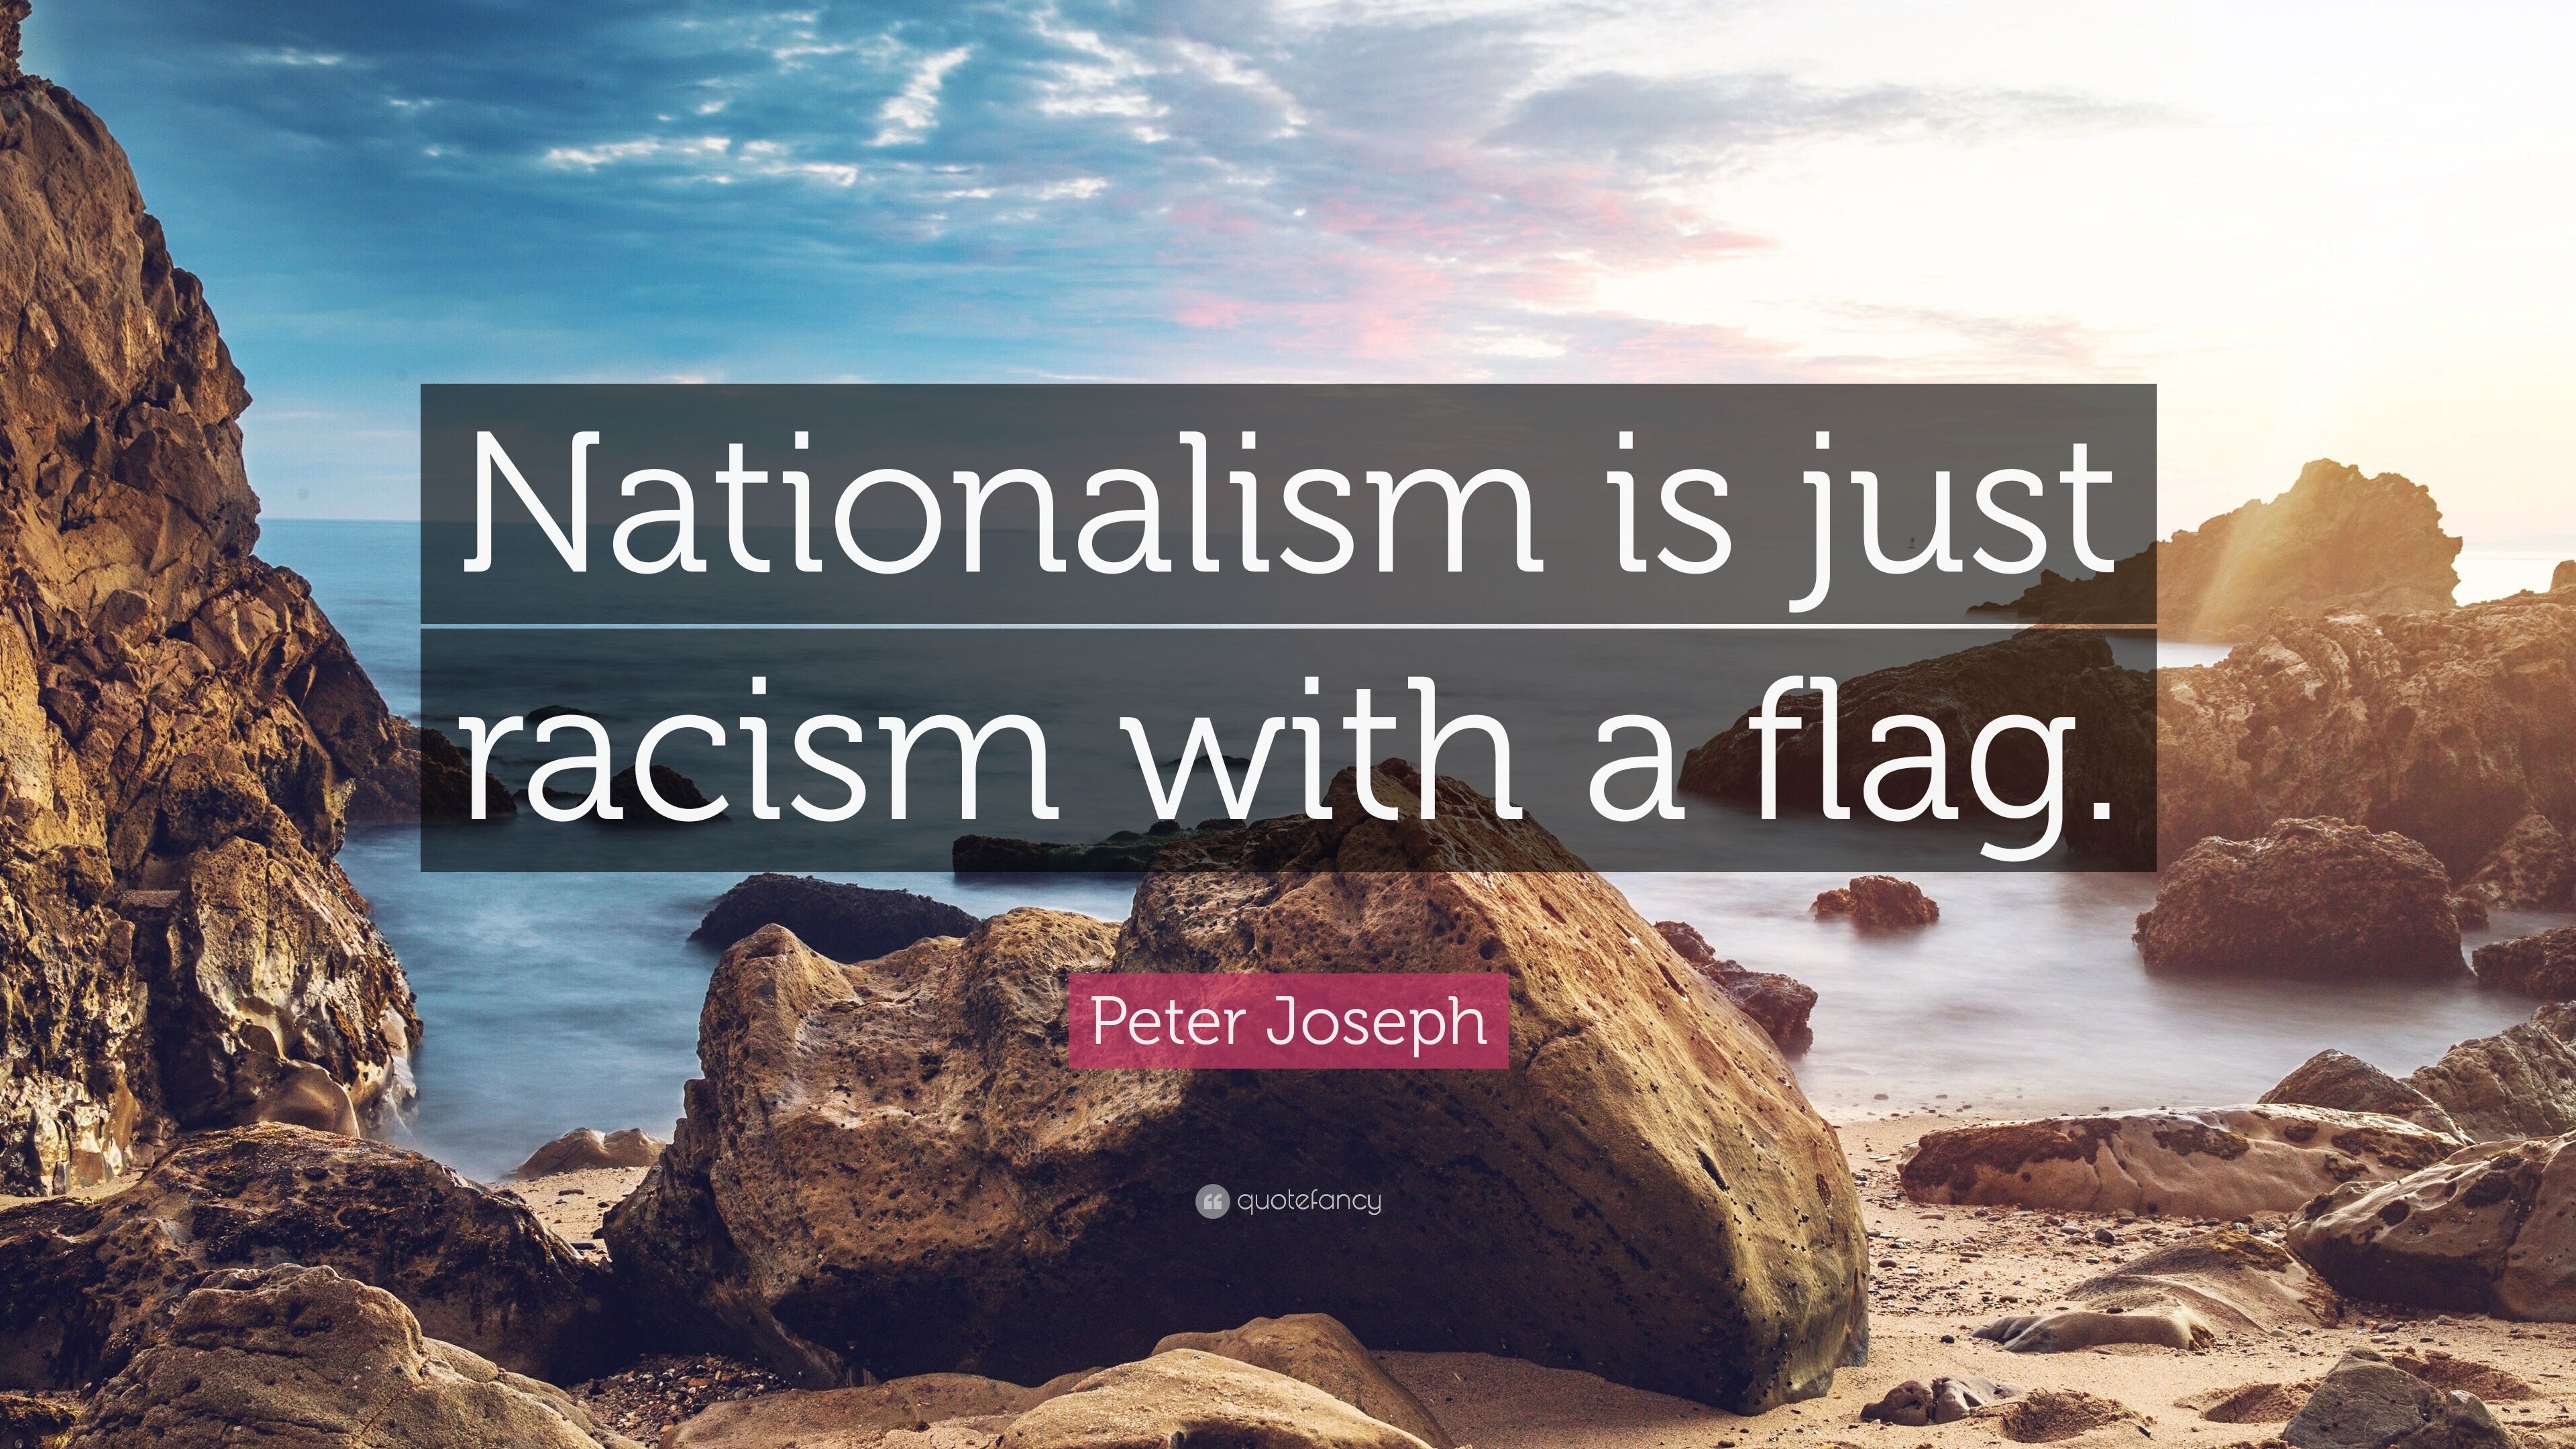 Peter Joseph Quote: “Nationalism is just racism with a flag.” 12